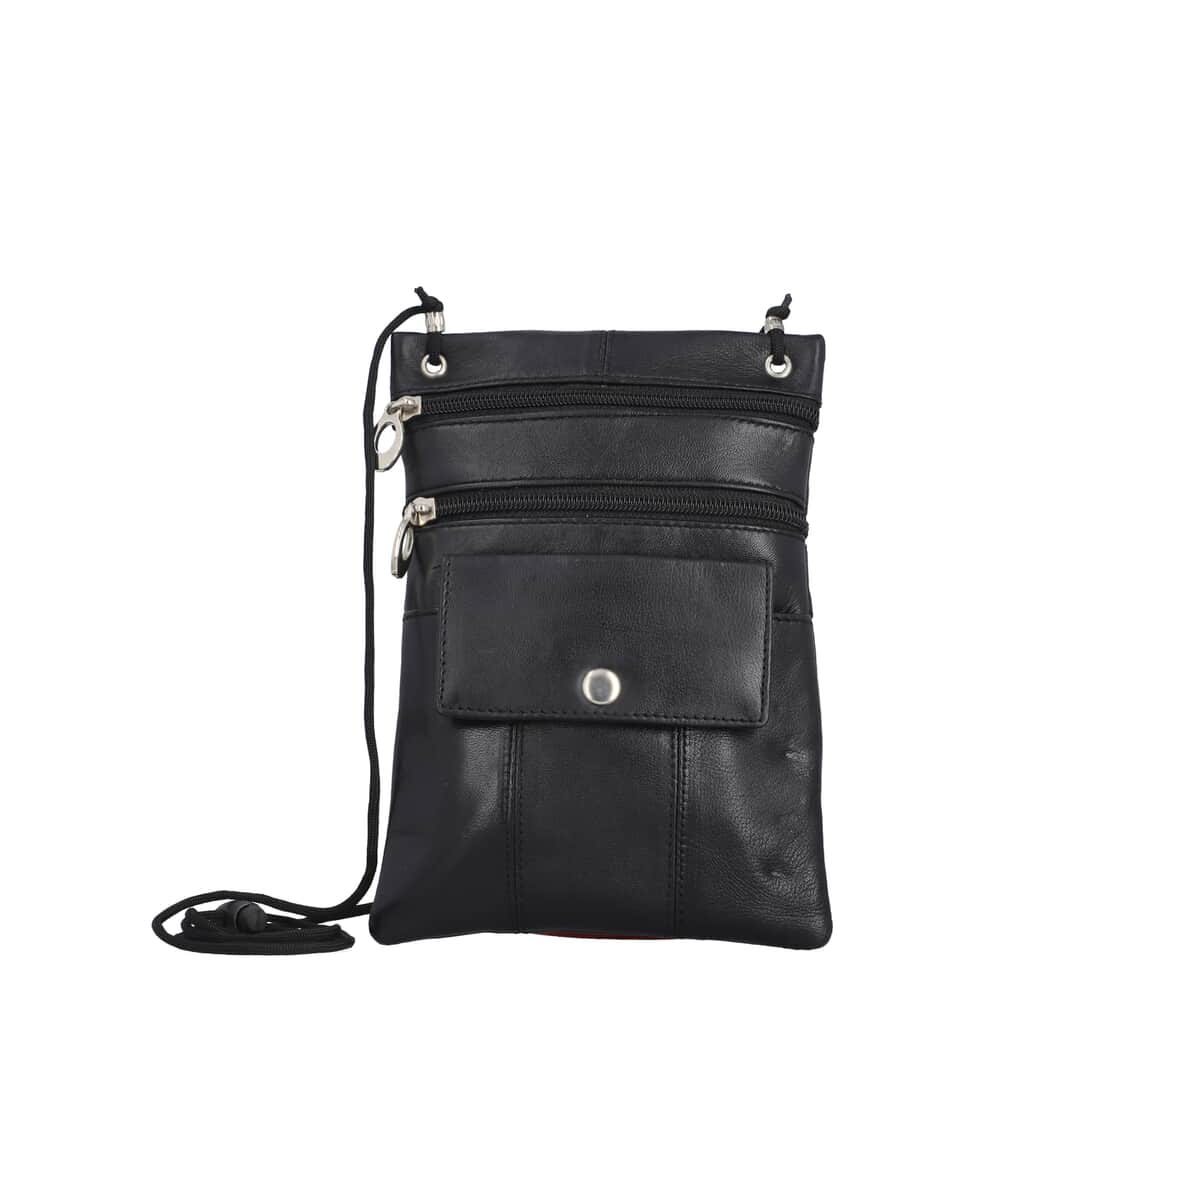 Newage Black 100% Genuine Leather Crossbody Bag with Man-made Straps image number 0